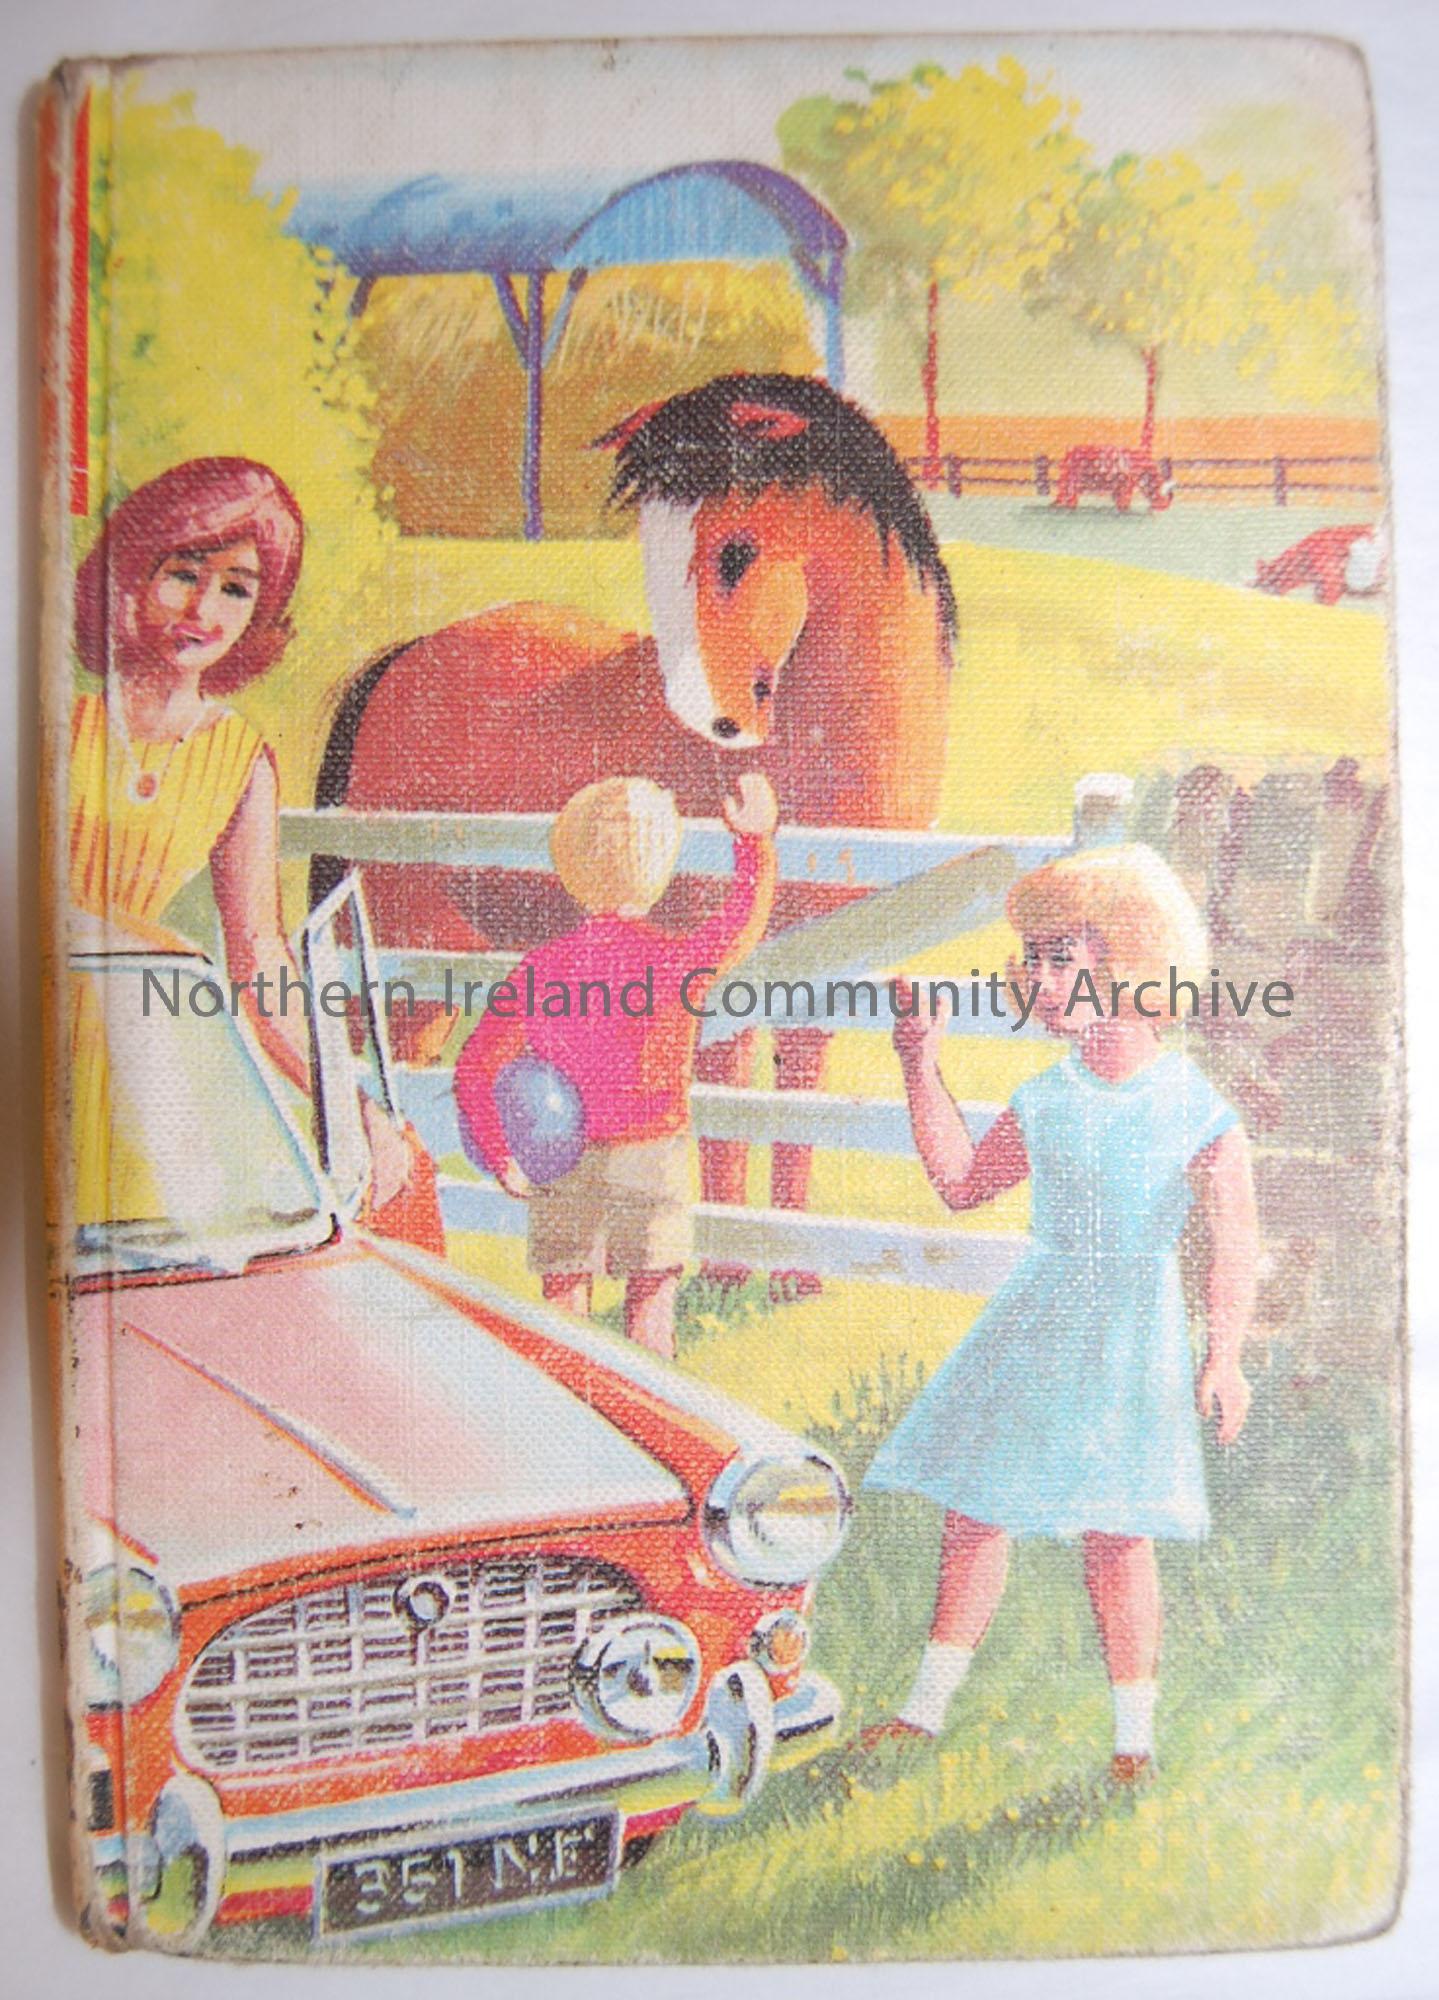 By Maciver, published by Gibson & Sons Ltd, 1957. Farm illustration on cover.